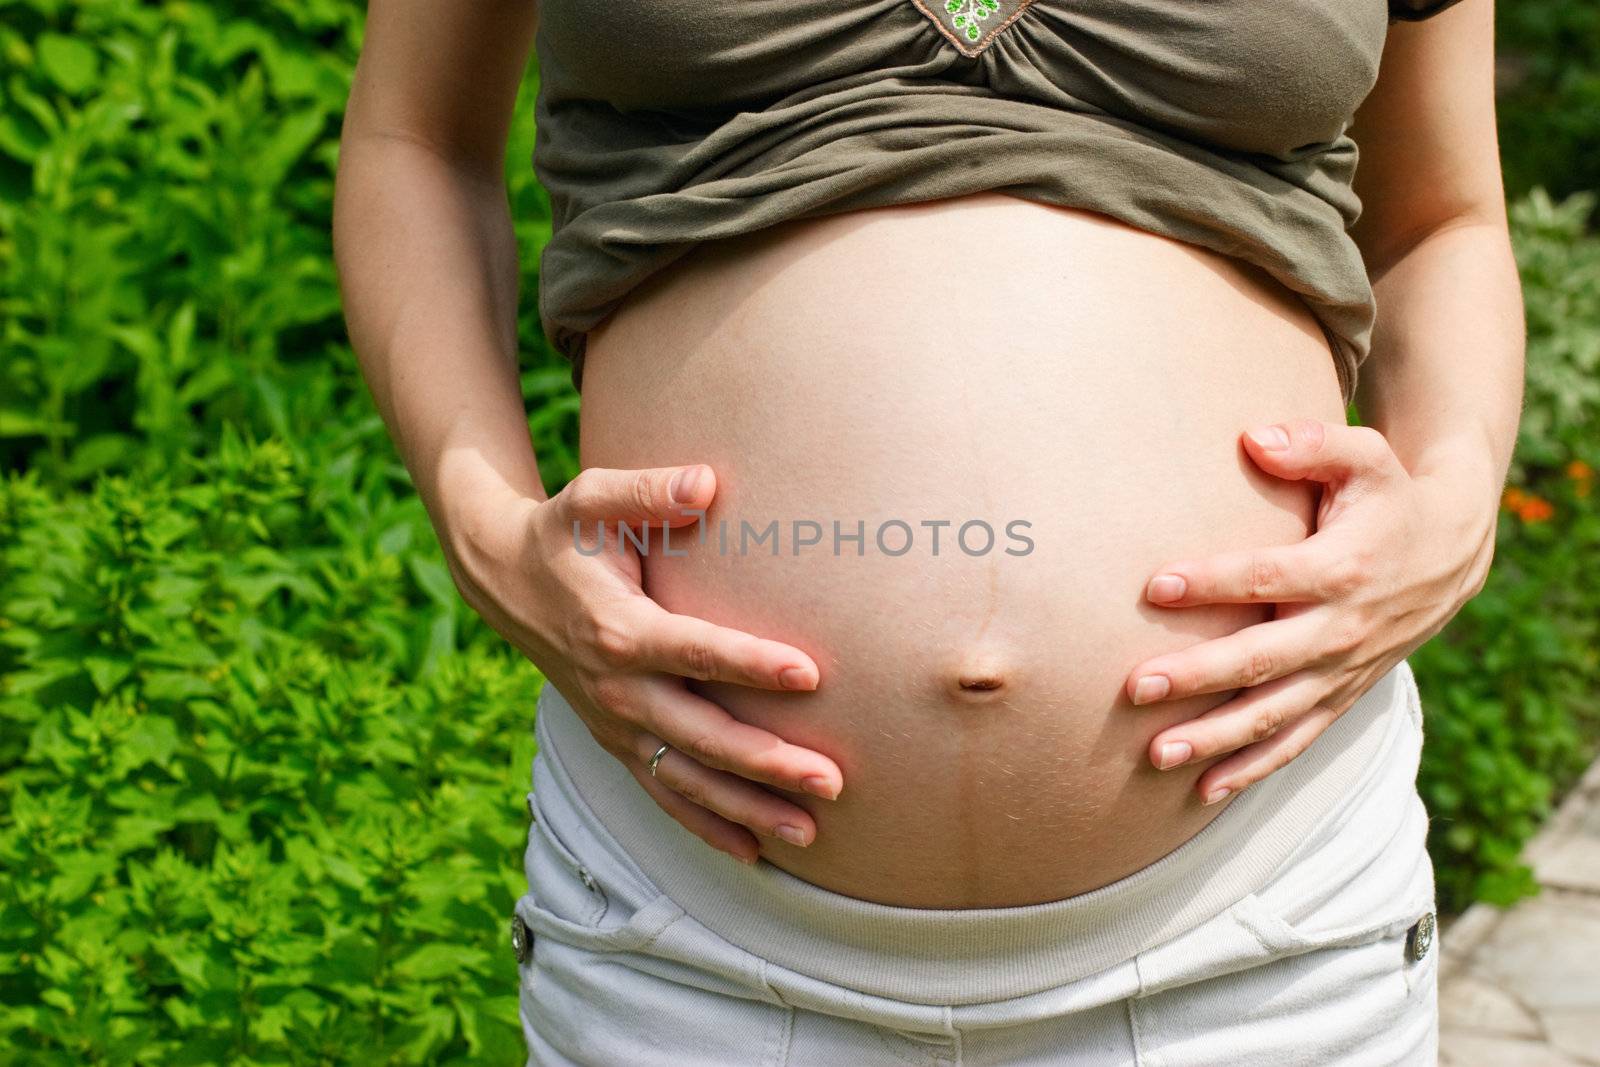 Young pregnant woman taking a sunbath in a summer garden